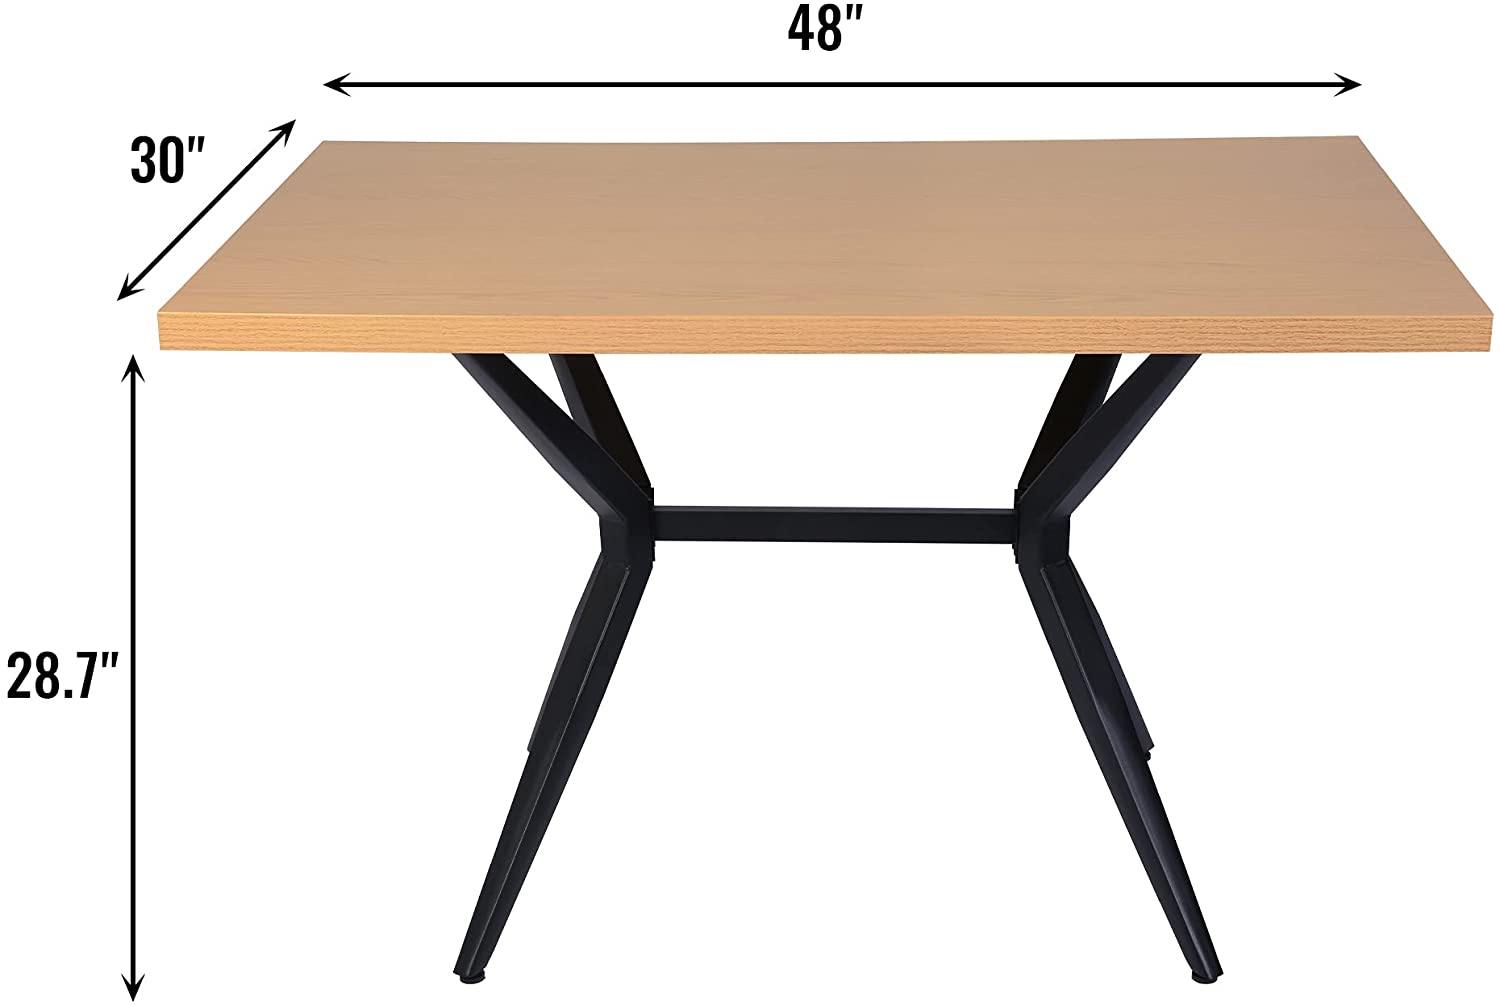 48" x 30" Dining Table Mid Century Modern Dining Table for 4 Person,w/Solid Metal Legs for Cafe Bar Balcony Home, - Bosonshop